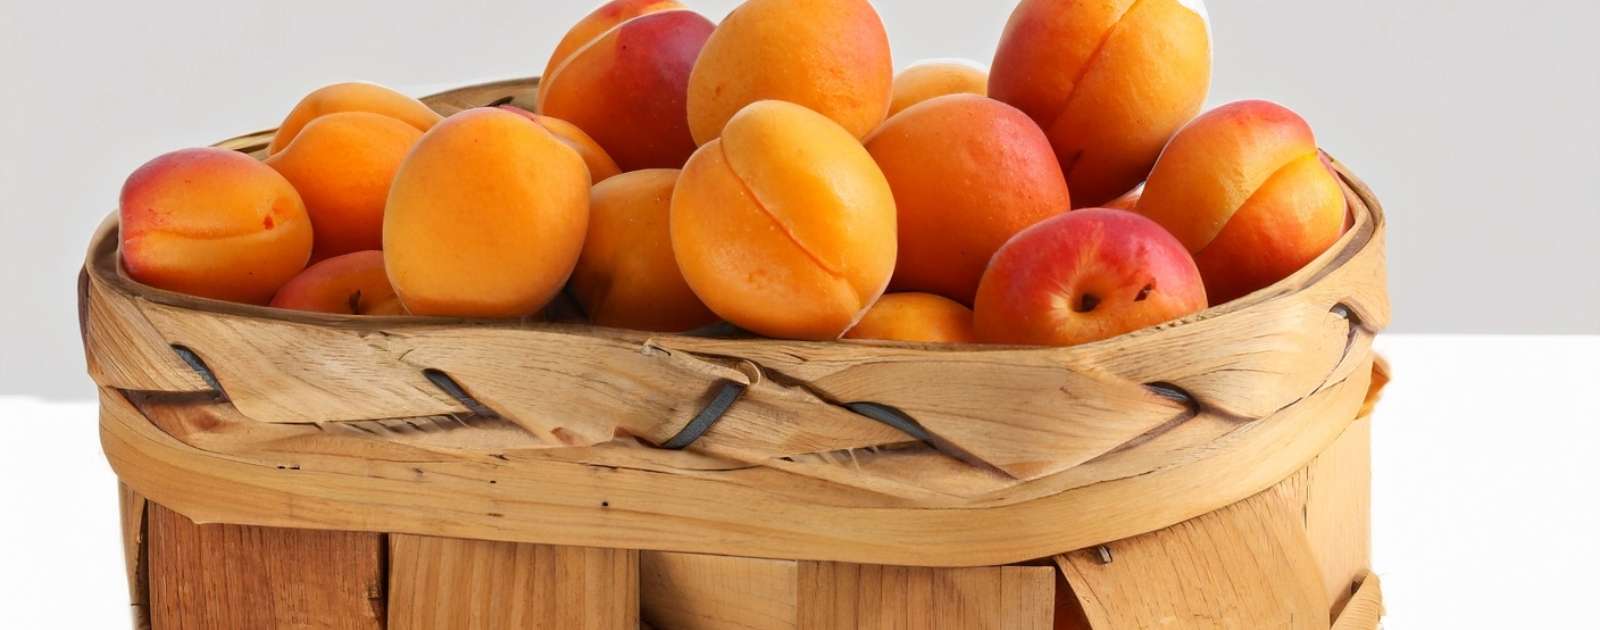 Brown Inside Peaches and Nectarines: Safety, Causes, and How to Tell If They're Bad